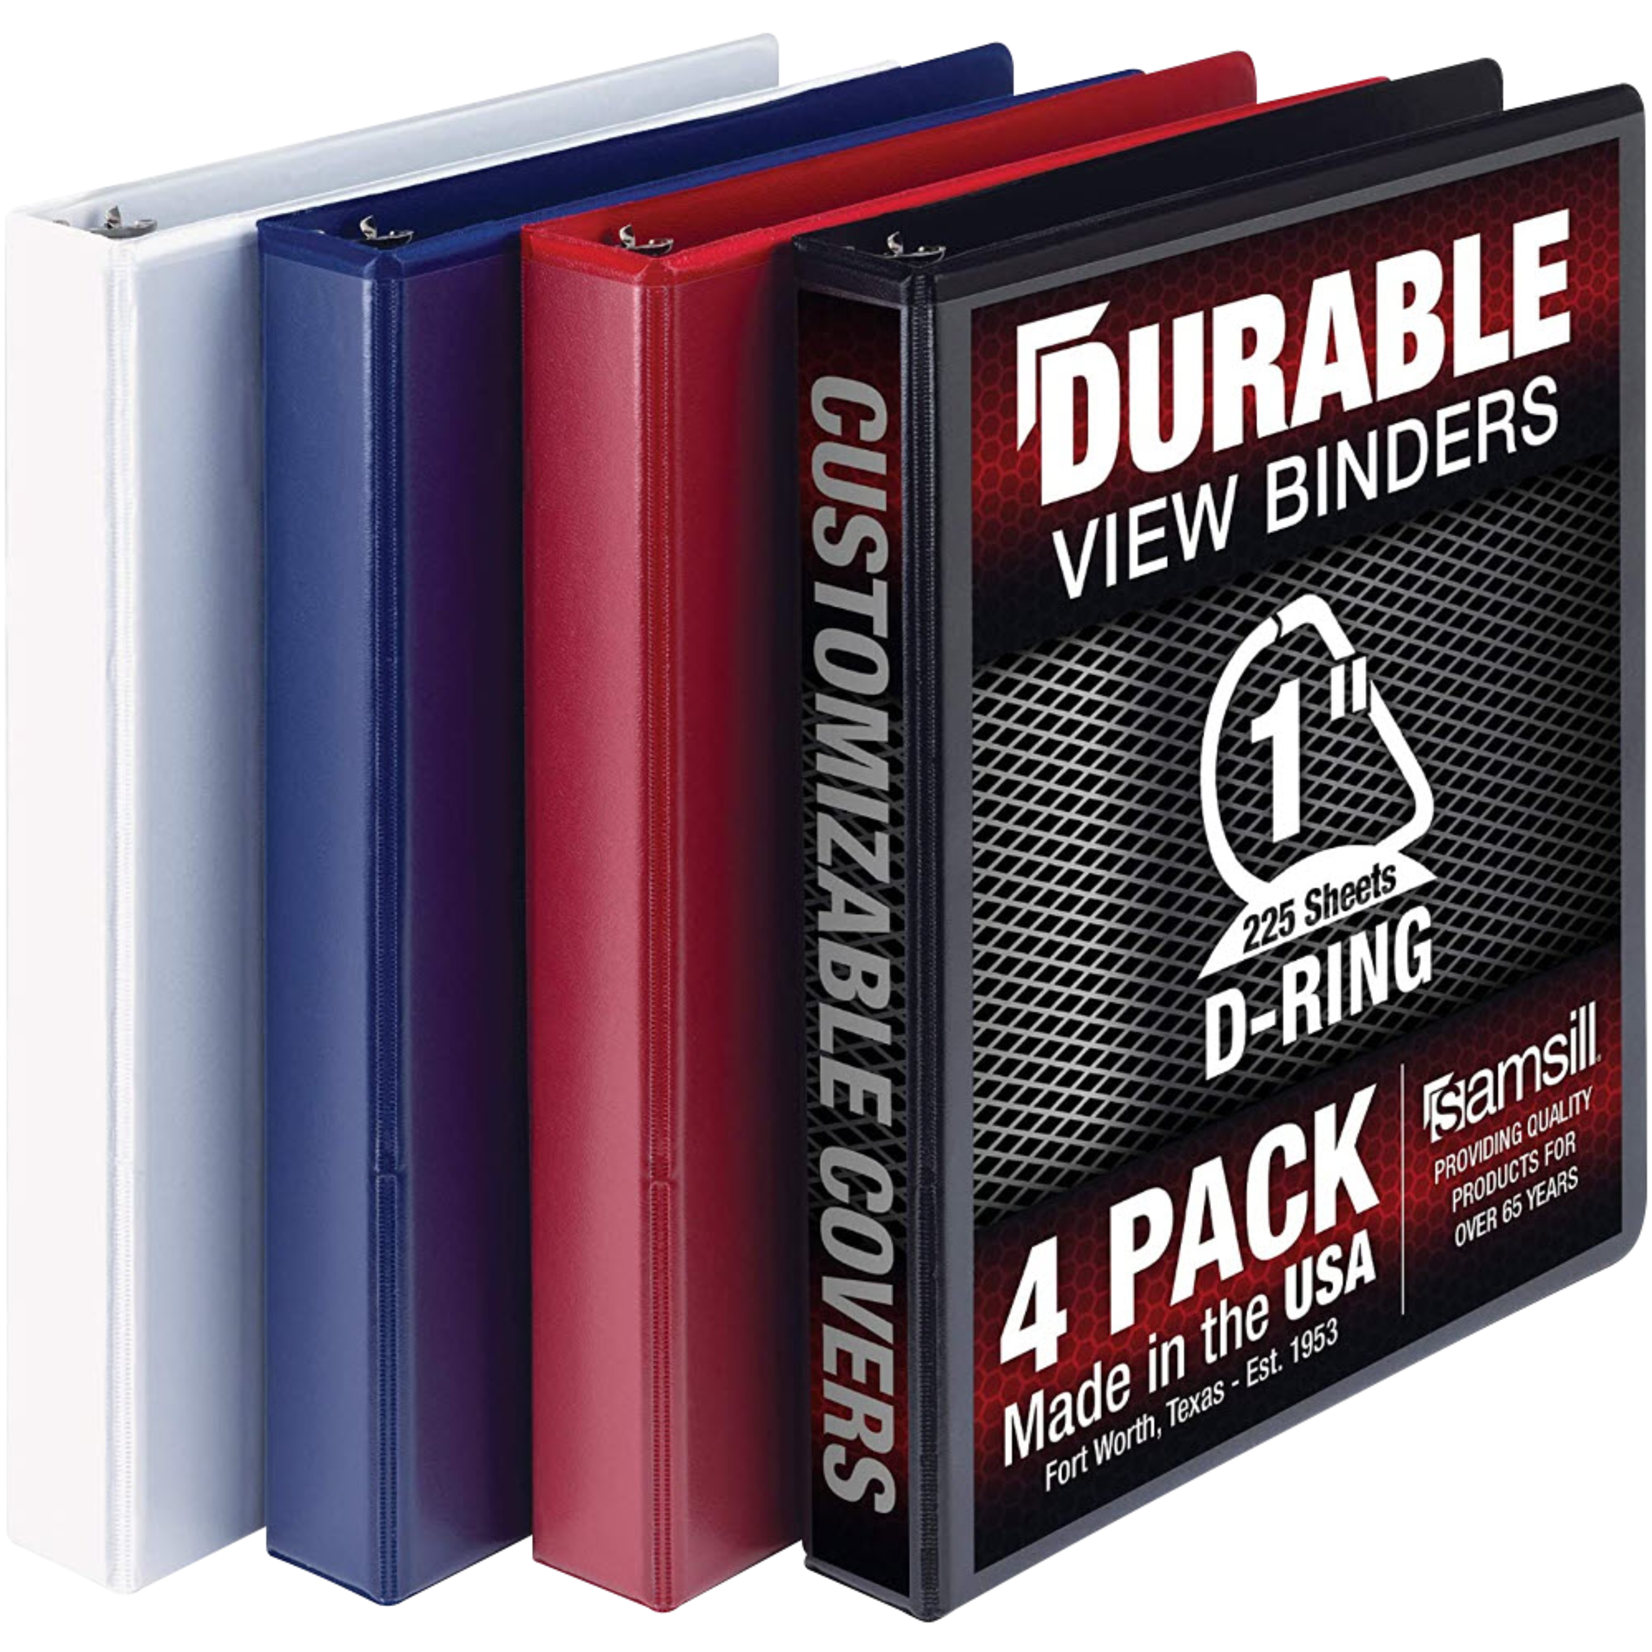 Samsill Samsill Durable D Ring View Binder, asst sold separately